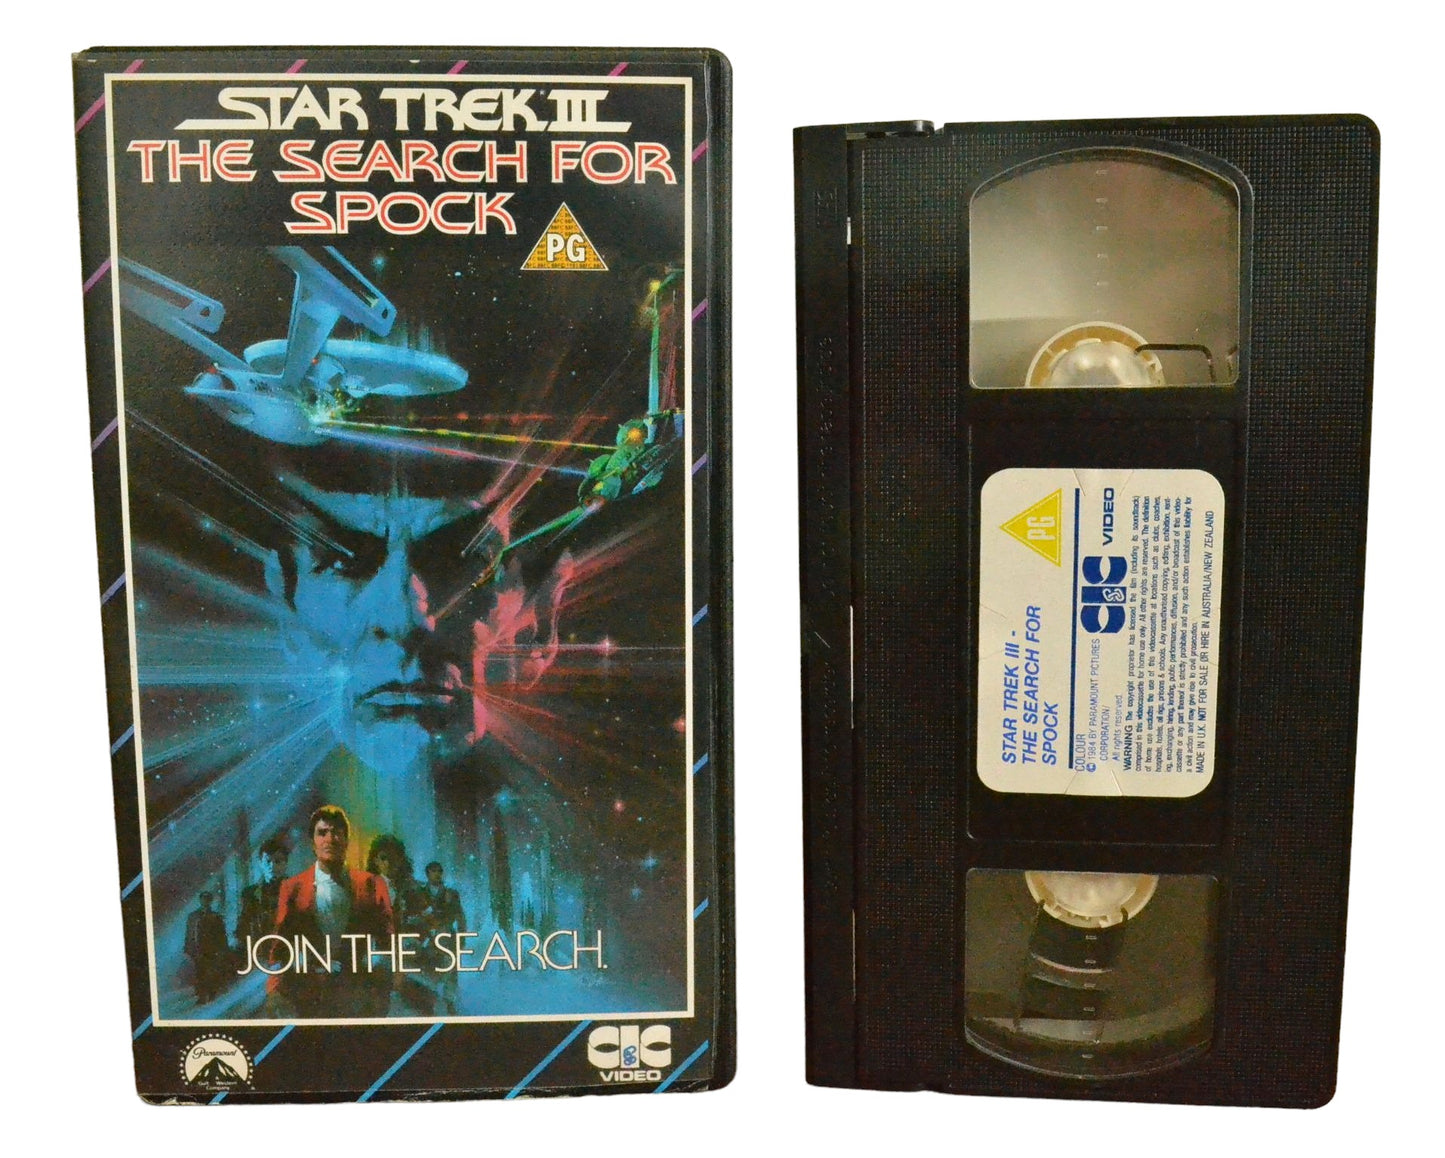 Star Trek III The Search For Spock - William Shatner - CIC Video - VHR2118 - Sci-Fi - Pal - VHS-